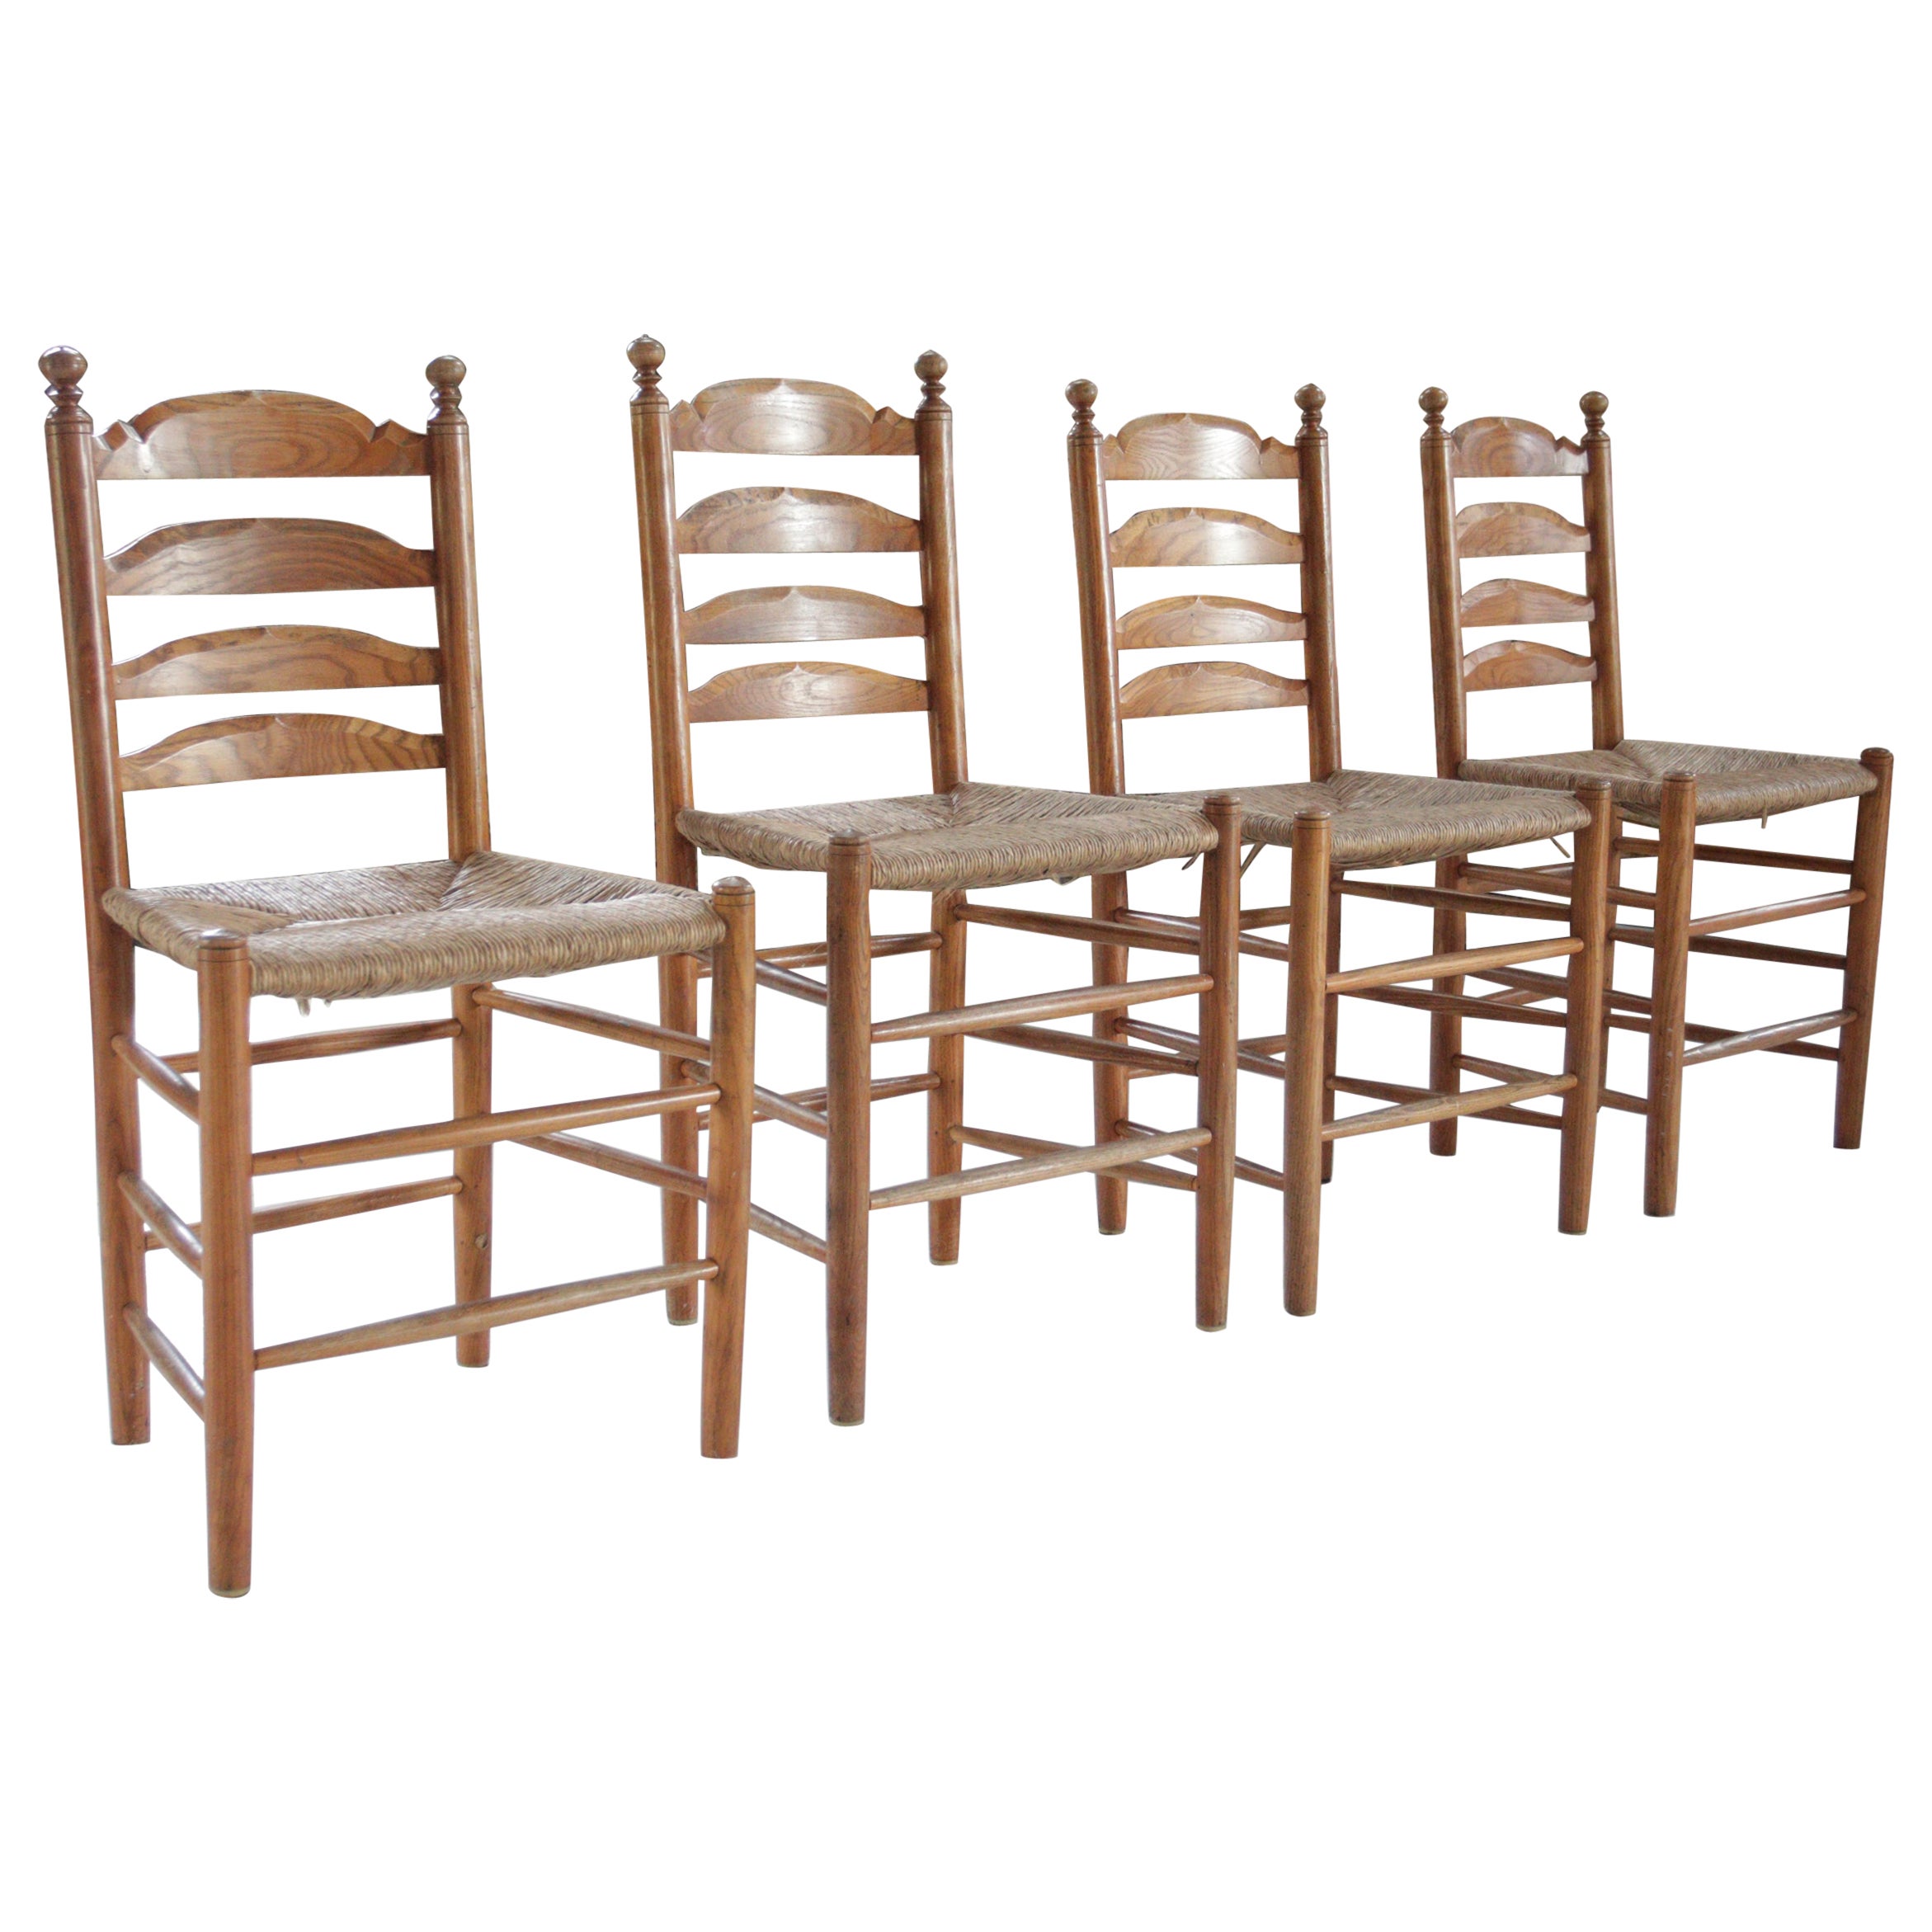 Set of 4 Old Rural Dutch Ladderback chairs 1960's For Sale